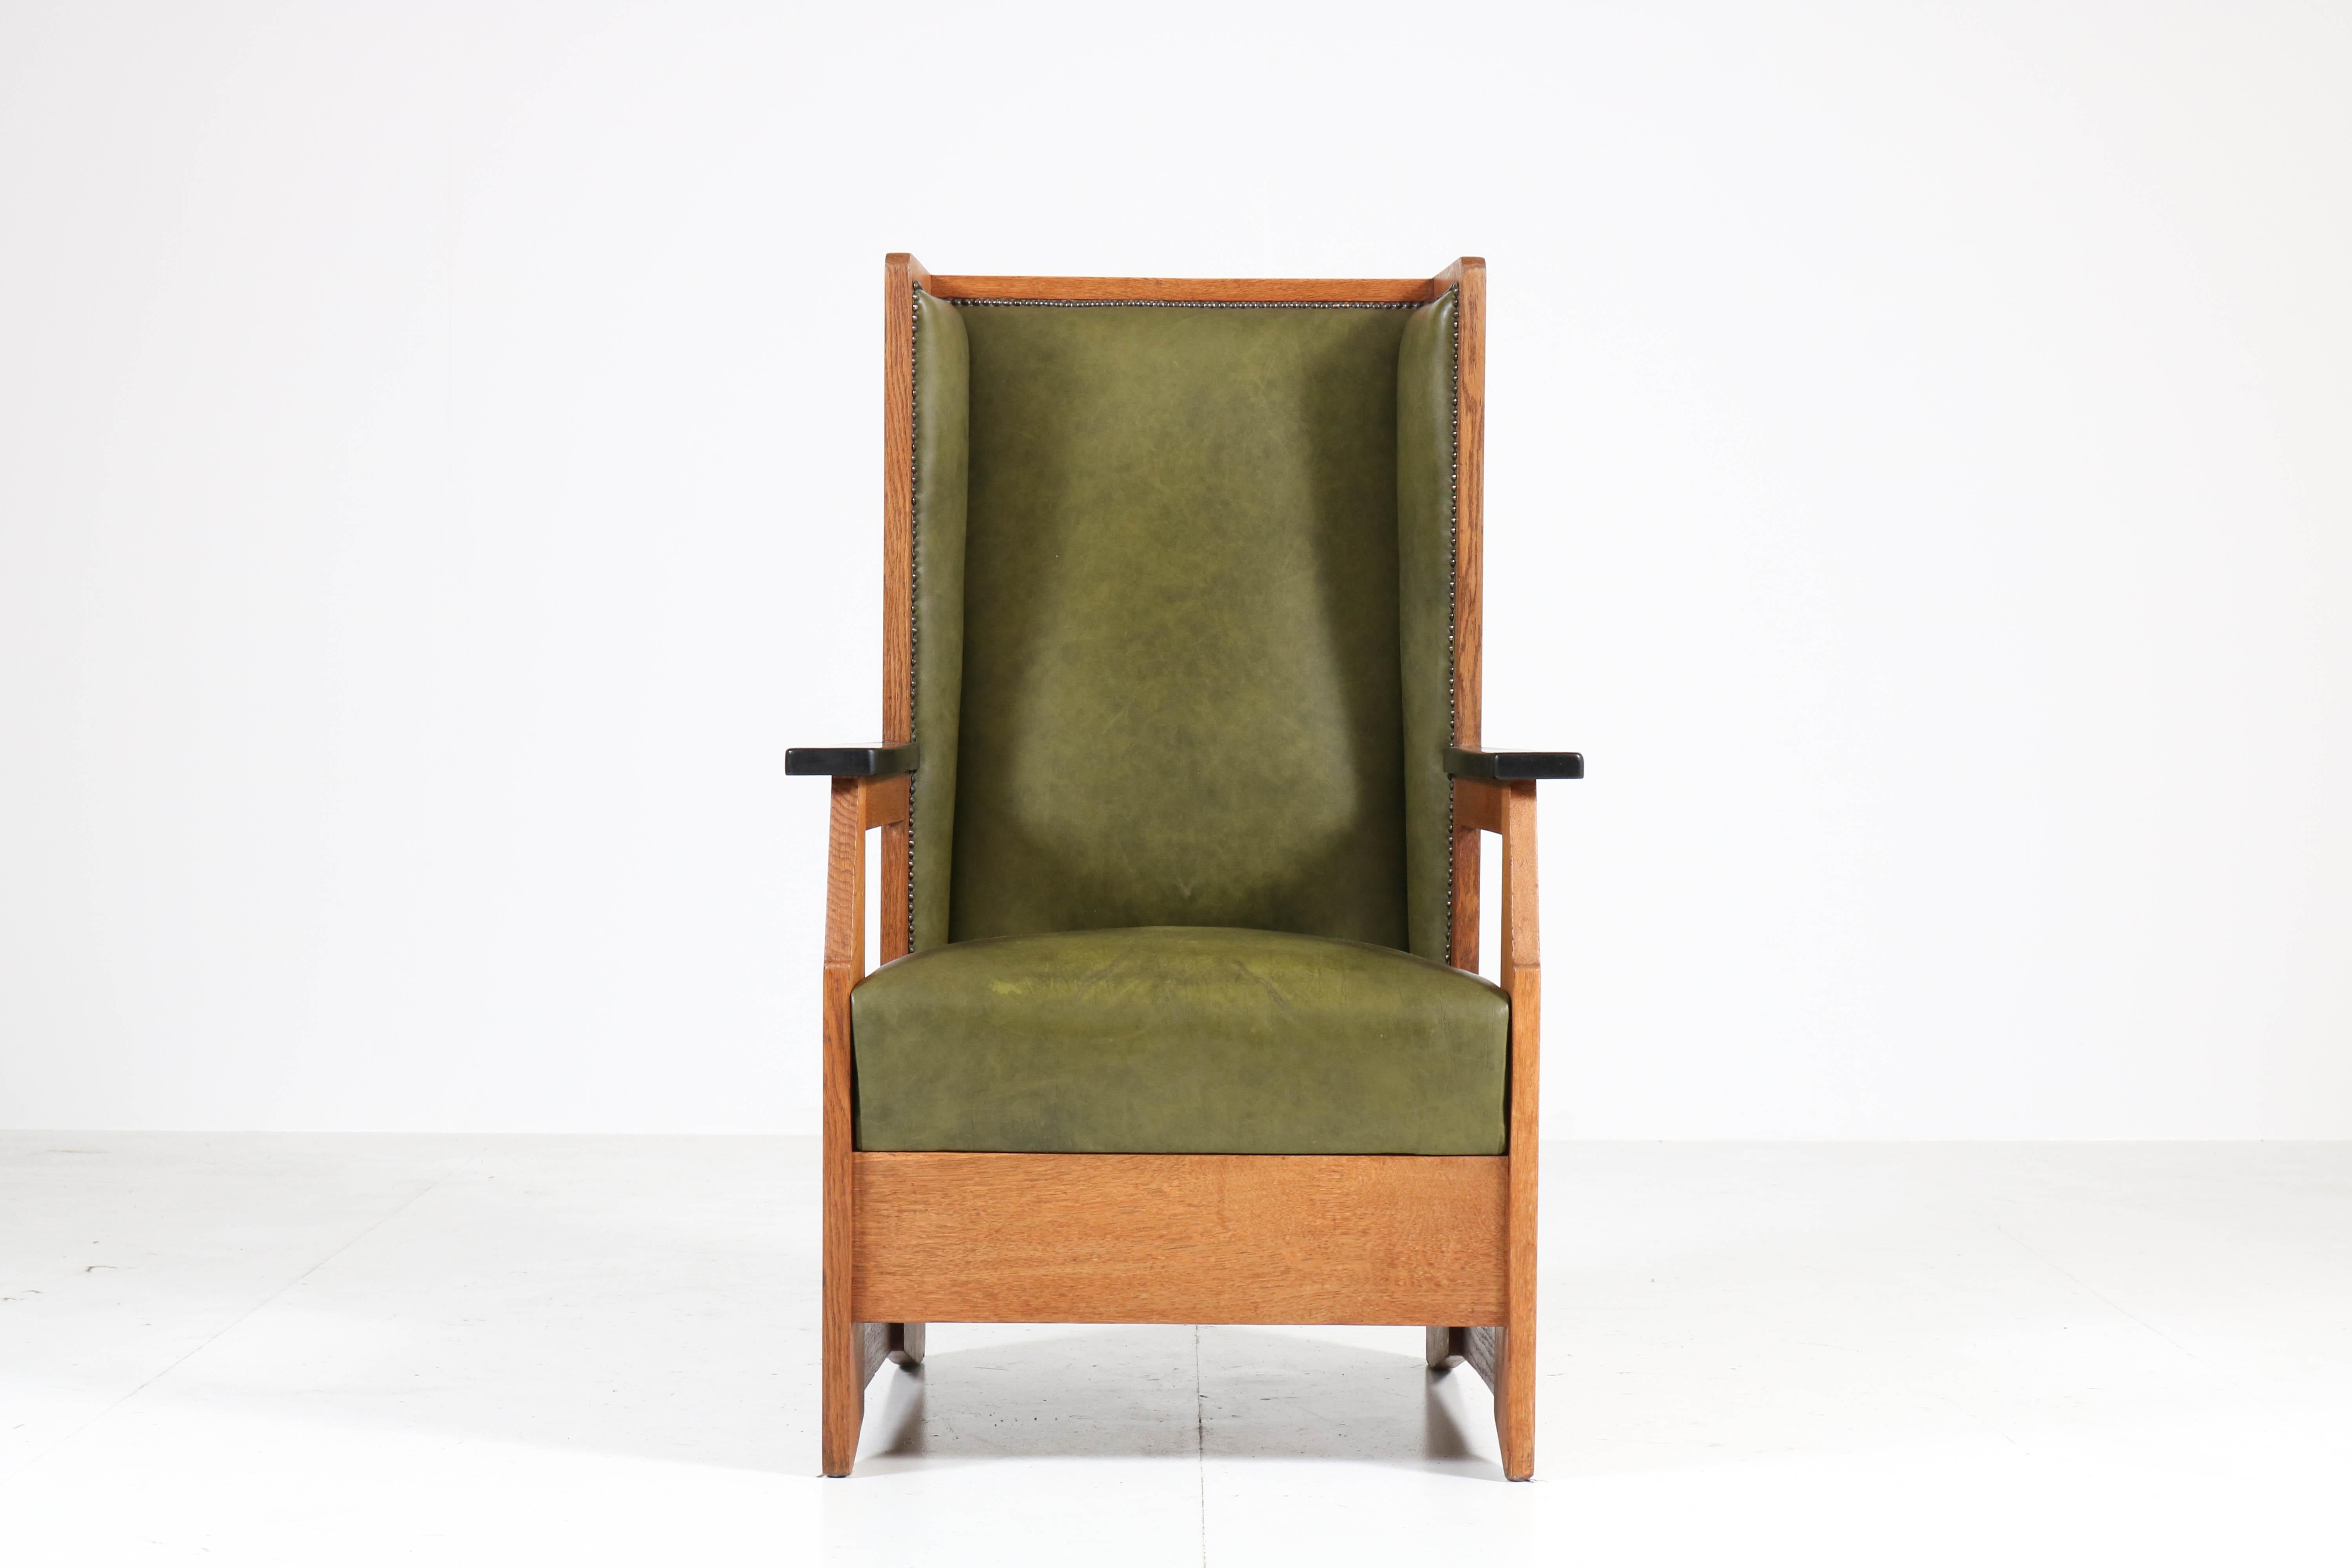 Early 20th Century Oak Art Deco Haagse School Wingback Chair by Henk Wouda for Pander, 1924